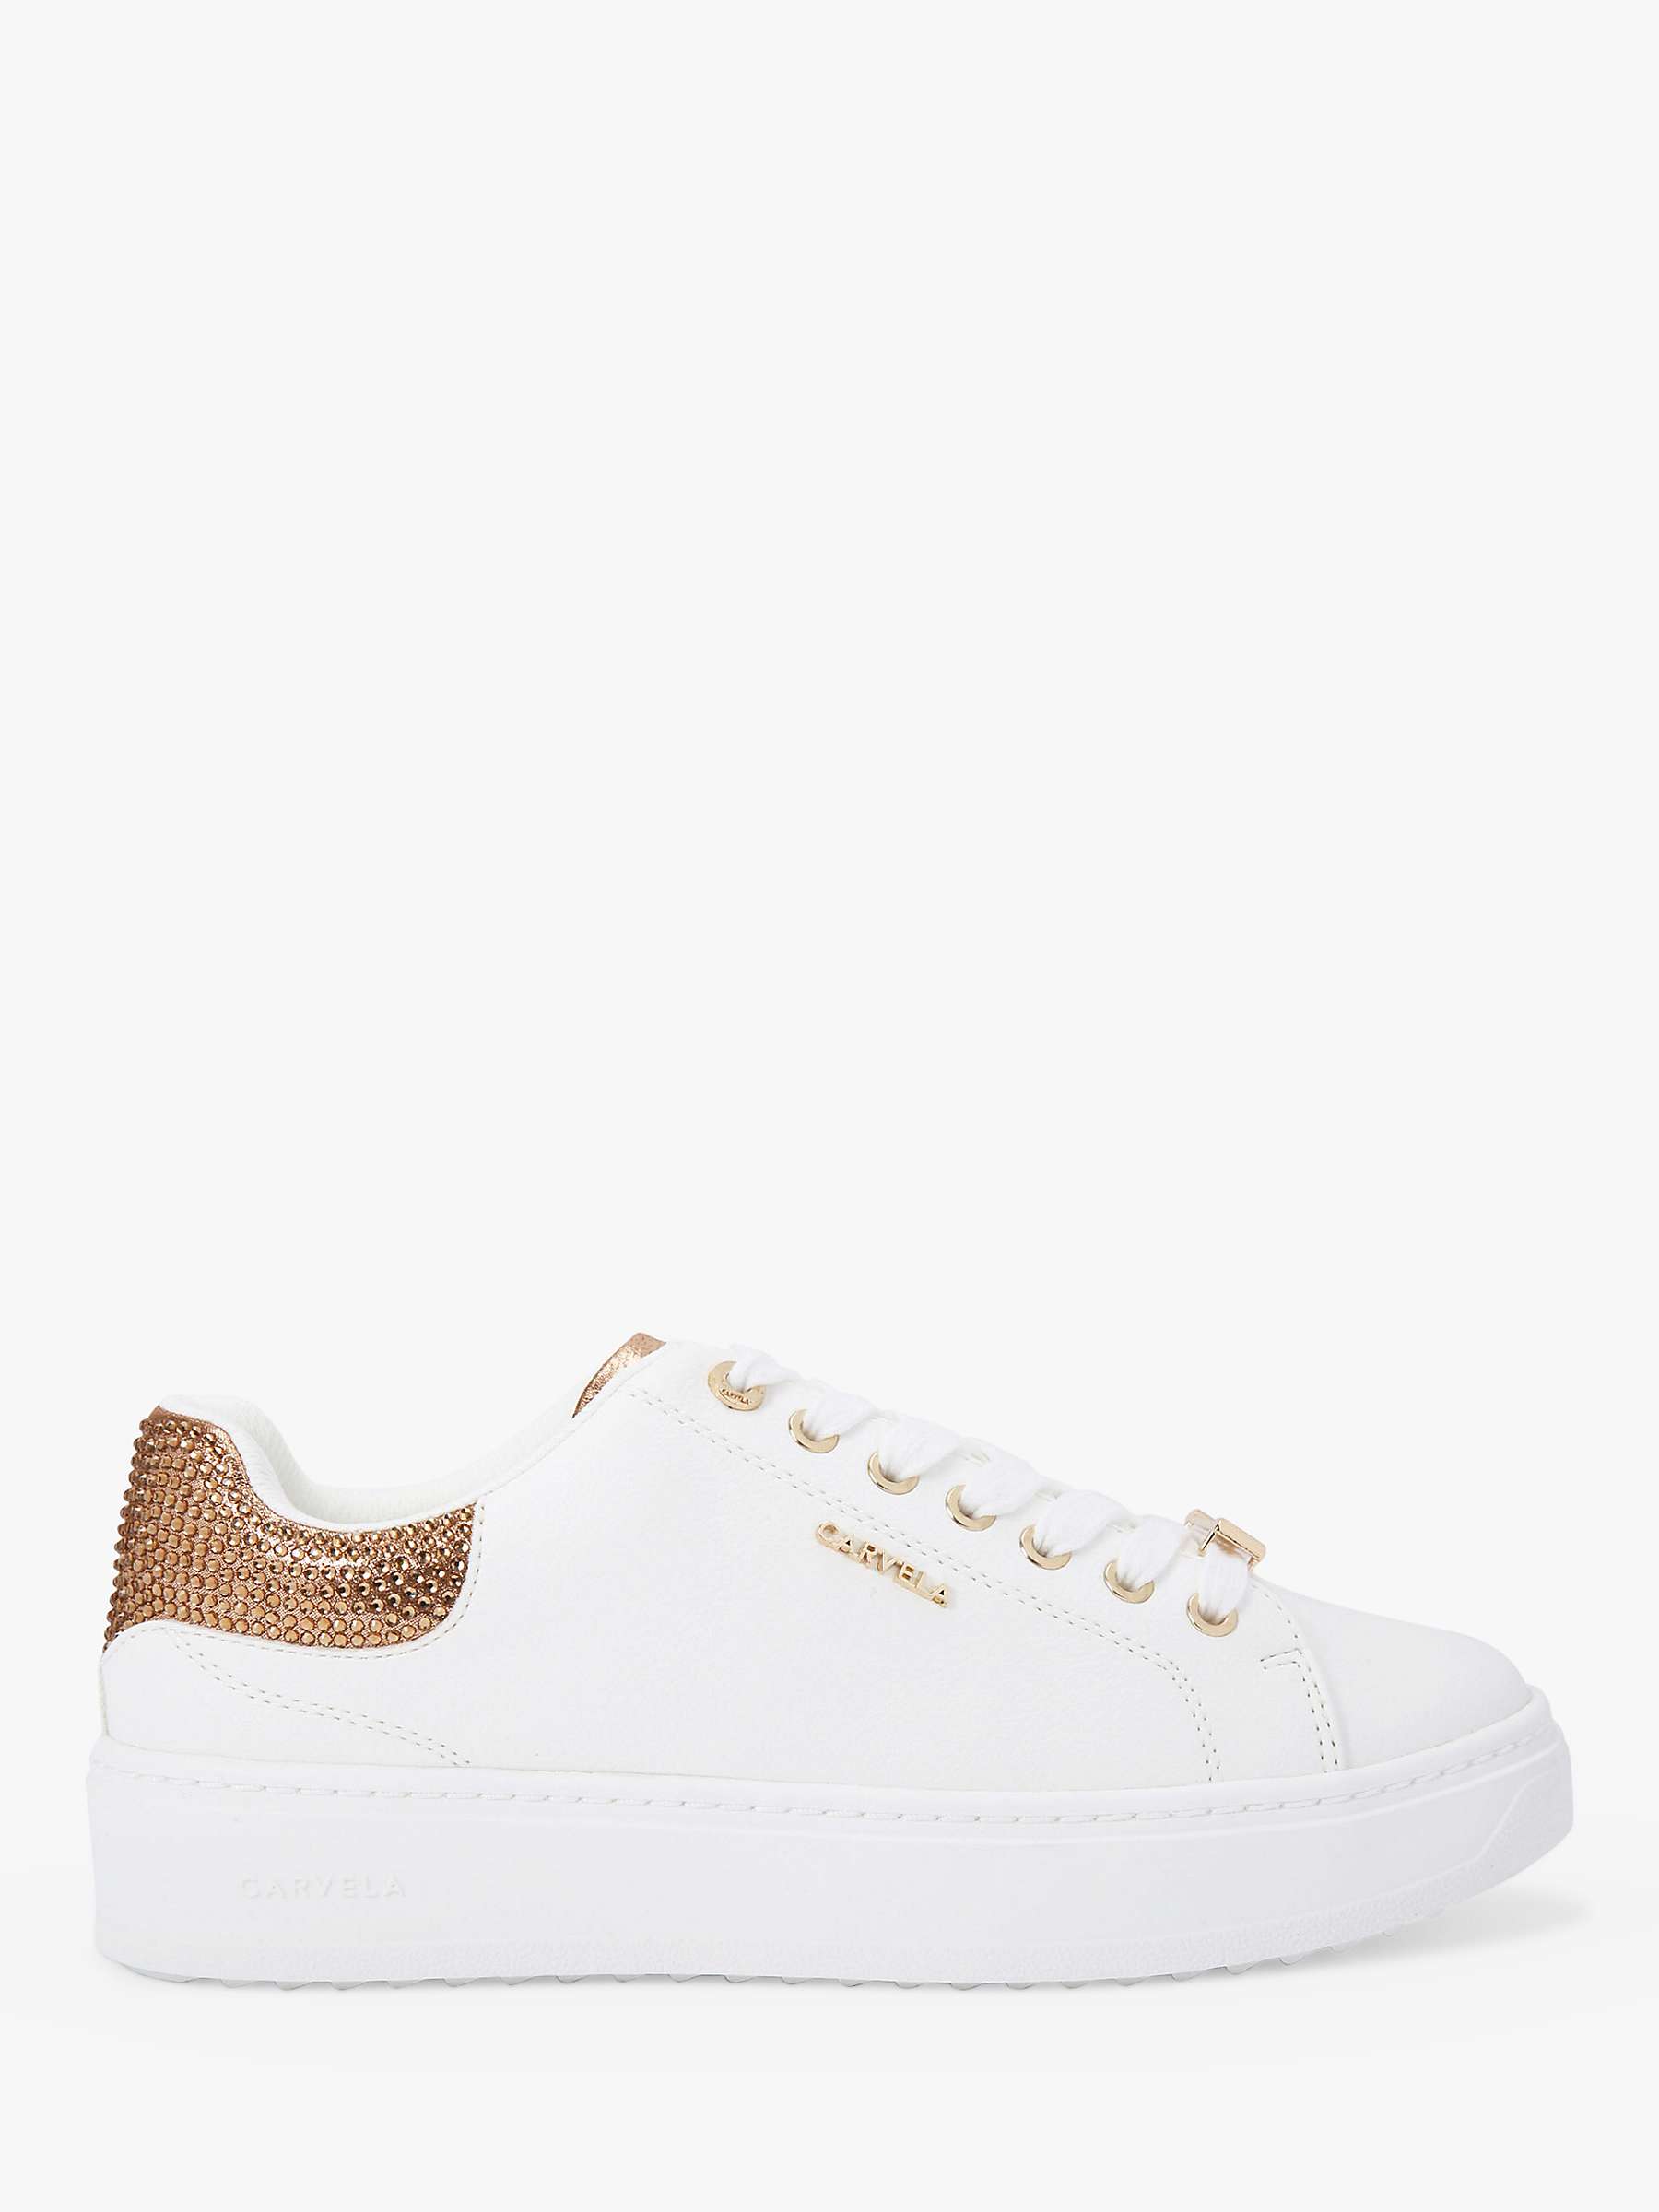 Carvela Dream Lace Up Trainers, White/Gold Stud at John Lewis & Partners